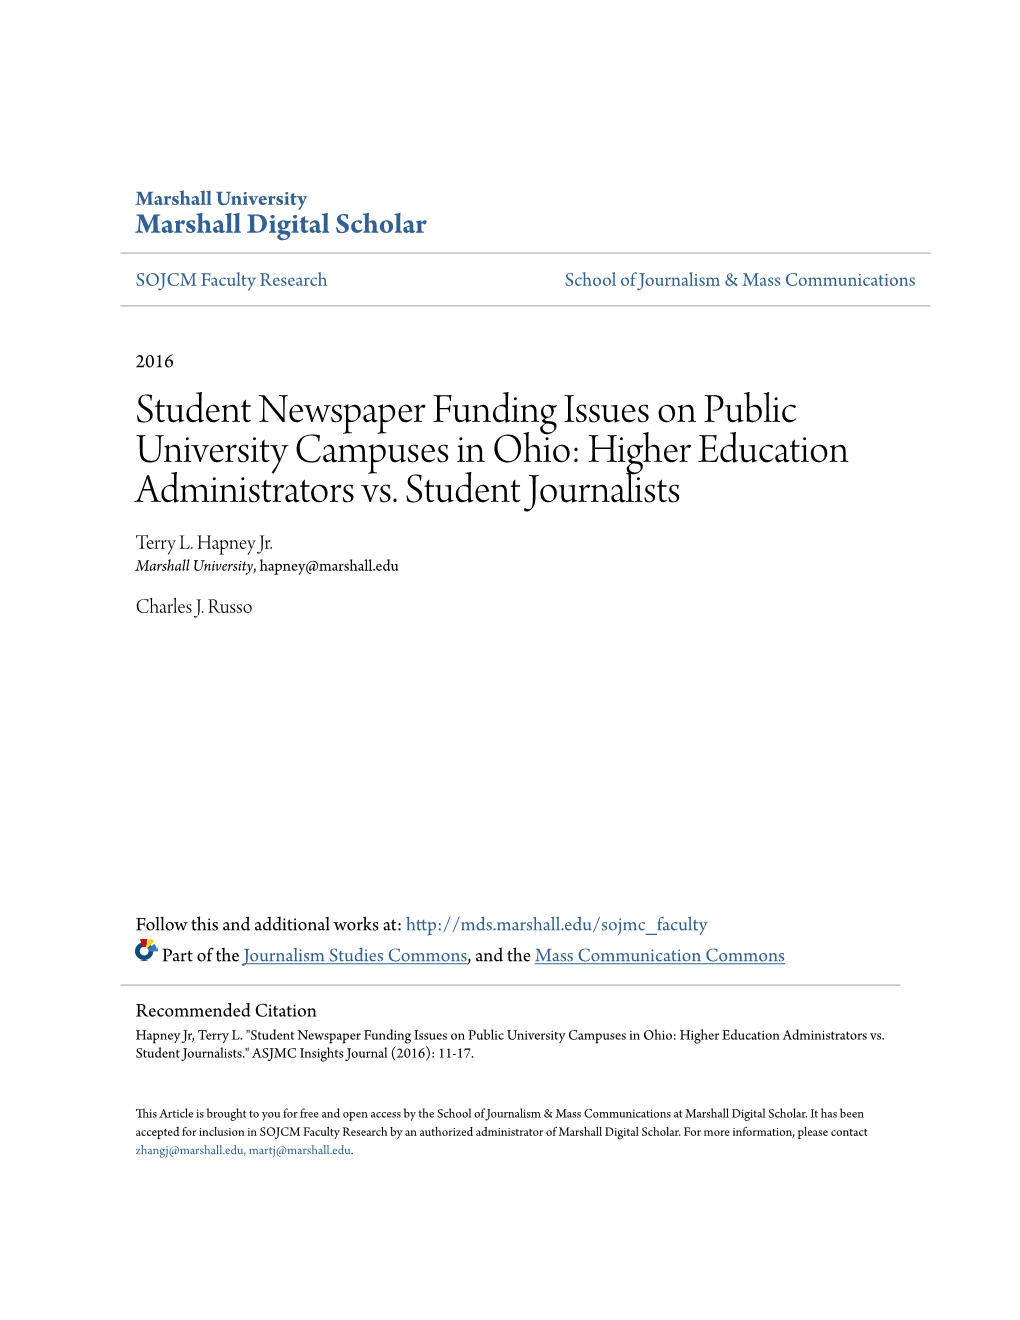 Student Newspaper Funding Issues on Public University Campuses in Ohio: Higher Education Administrators Vs